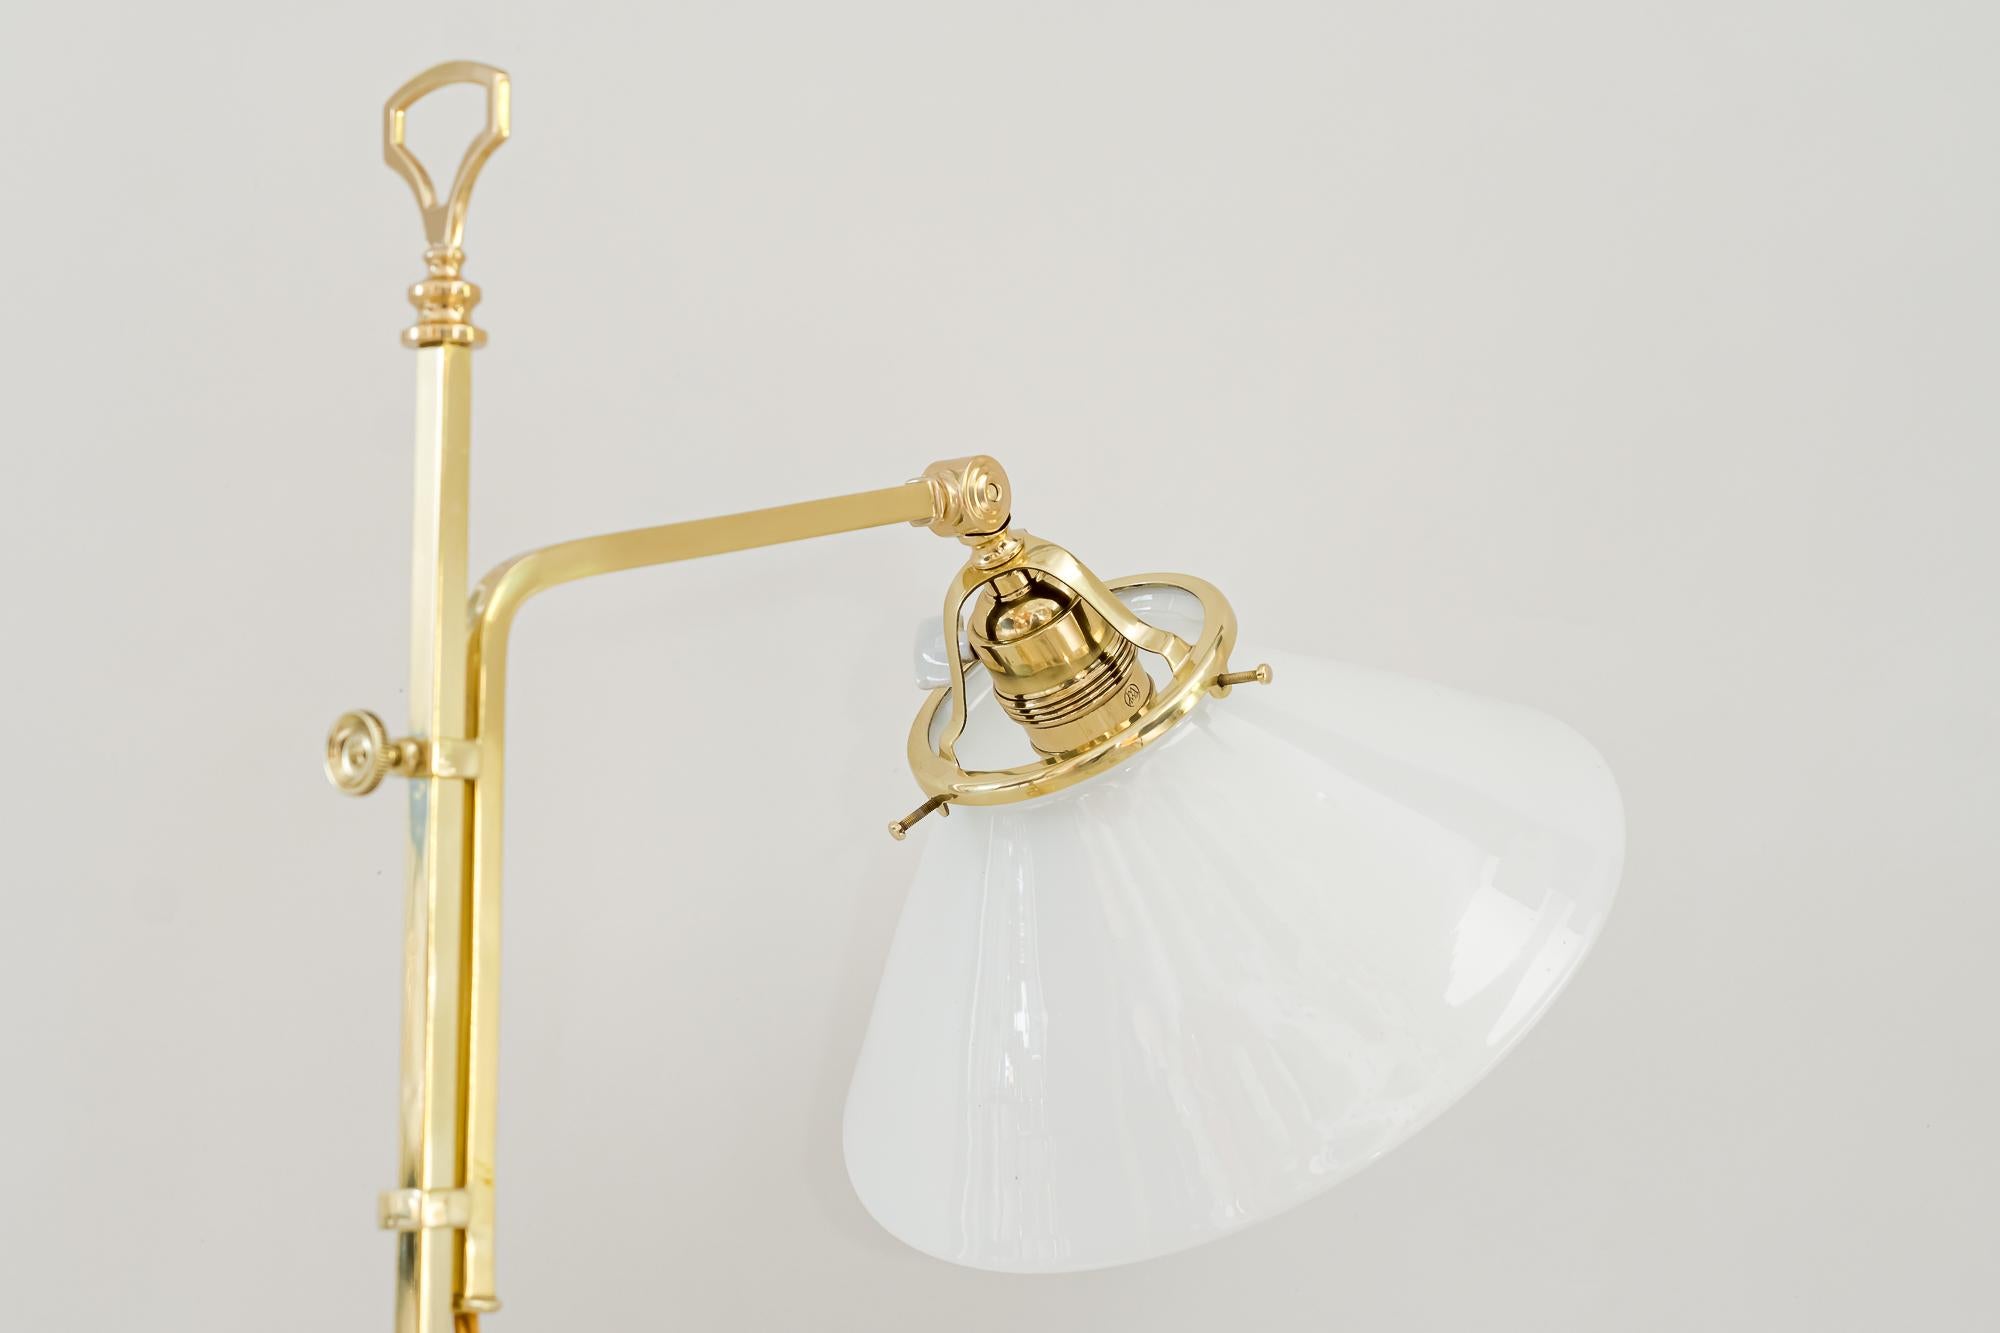 Adjustable Art Deco Table Lamp with Original Opal Glass Shade around 1920s For Sale 3